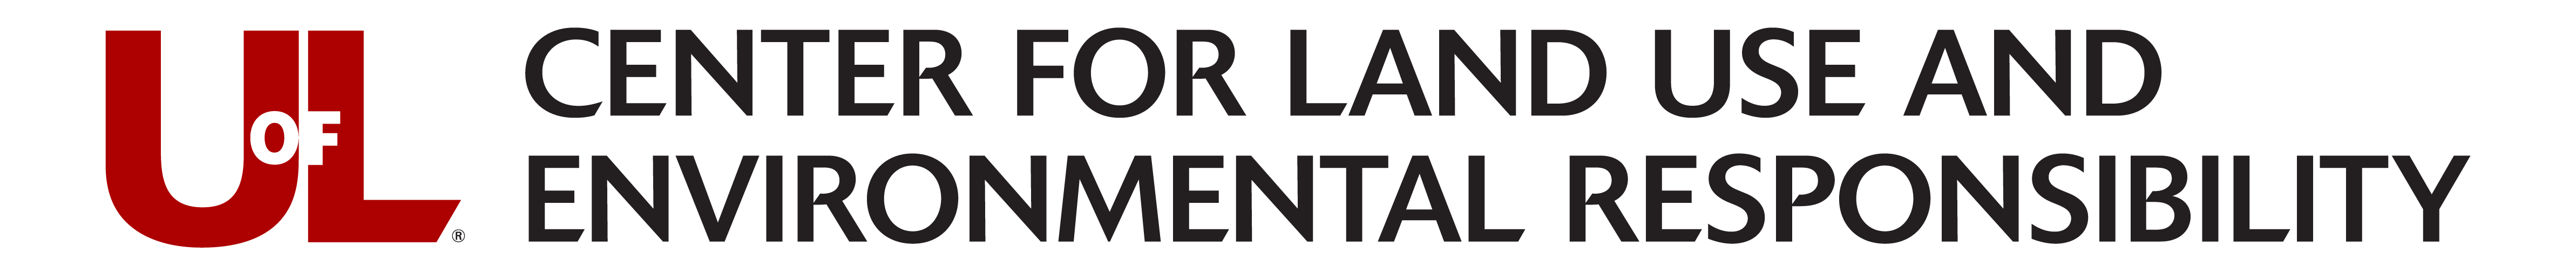 Center for land use and environmental responsibility